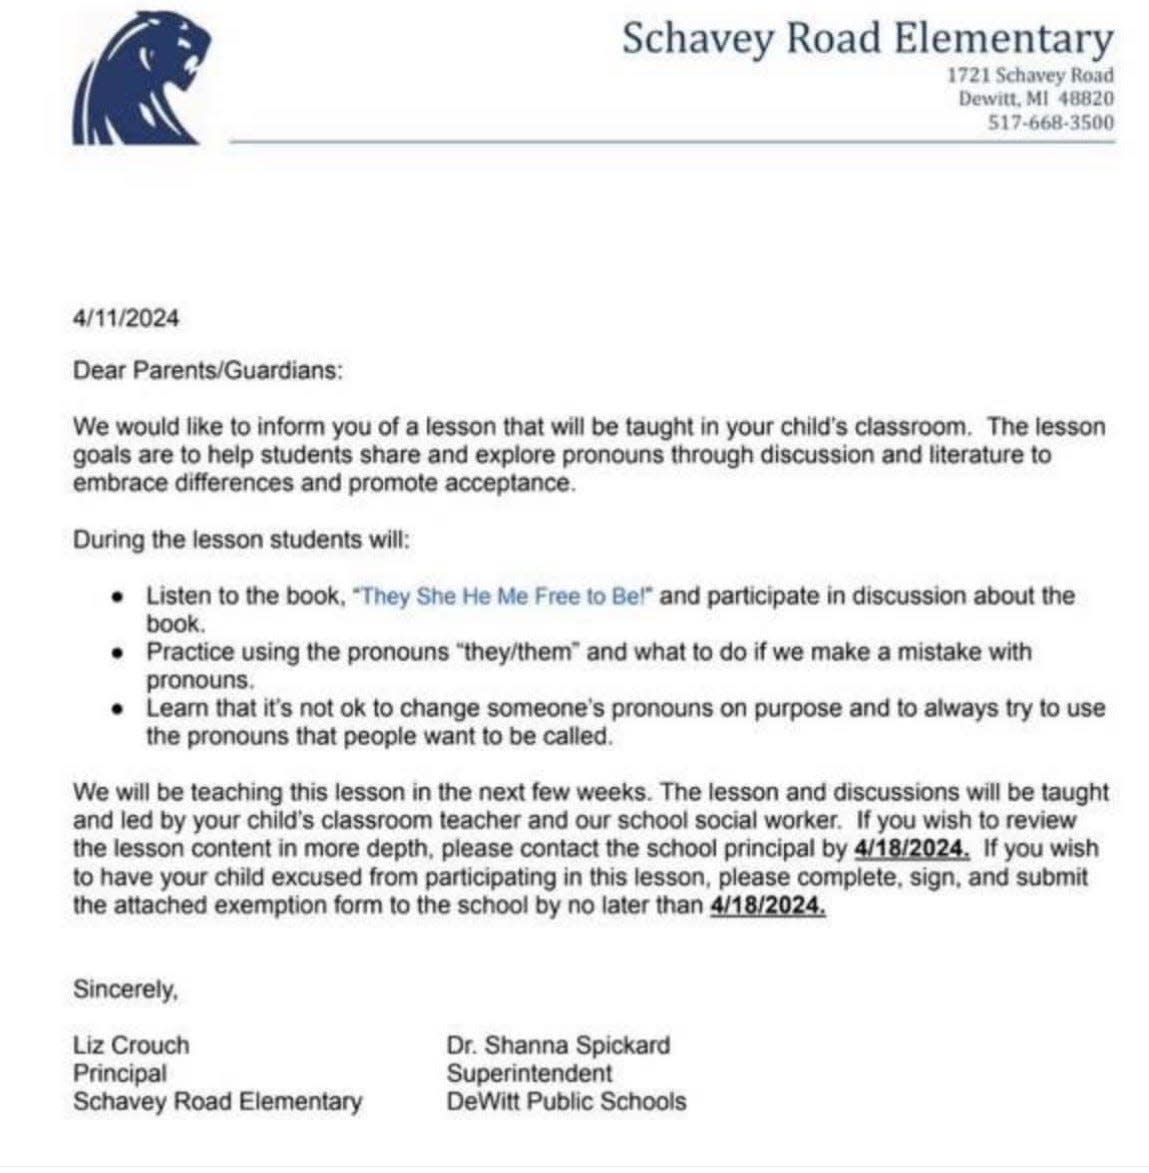 Letter sent to parents with students in the first grade class at Schavey Road Elementary School where a lesson on pronoun use will be taught. The letter is signed by the school's principal Liz Crouch and DeWitt Public School's Superintendent Shanna Spickard.